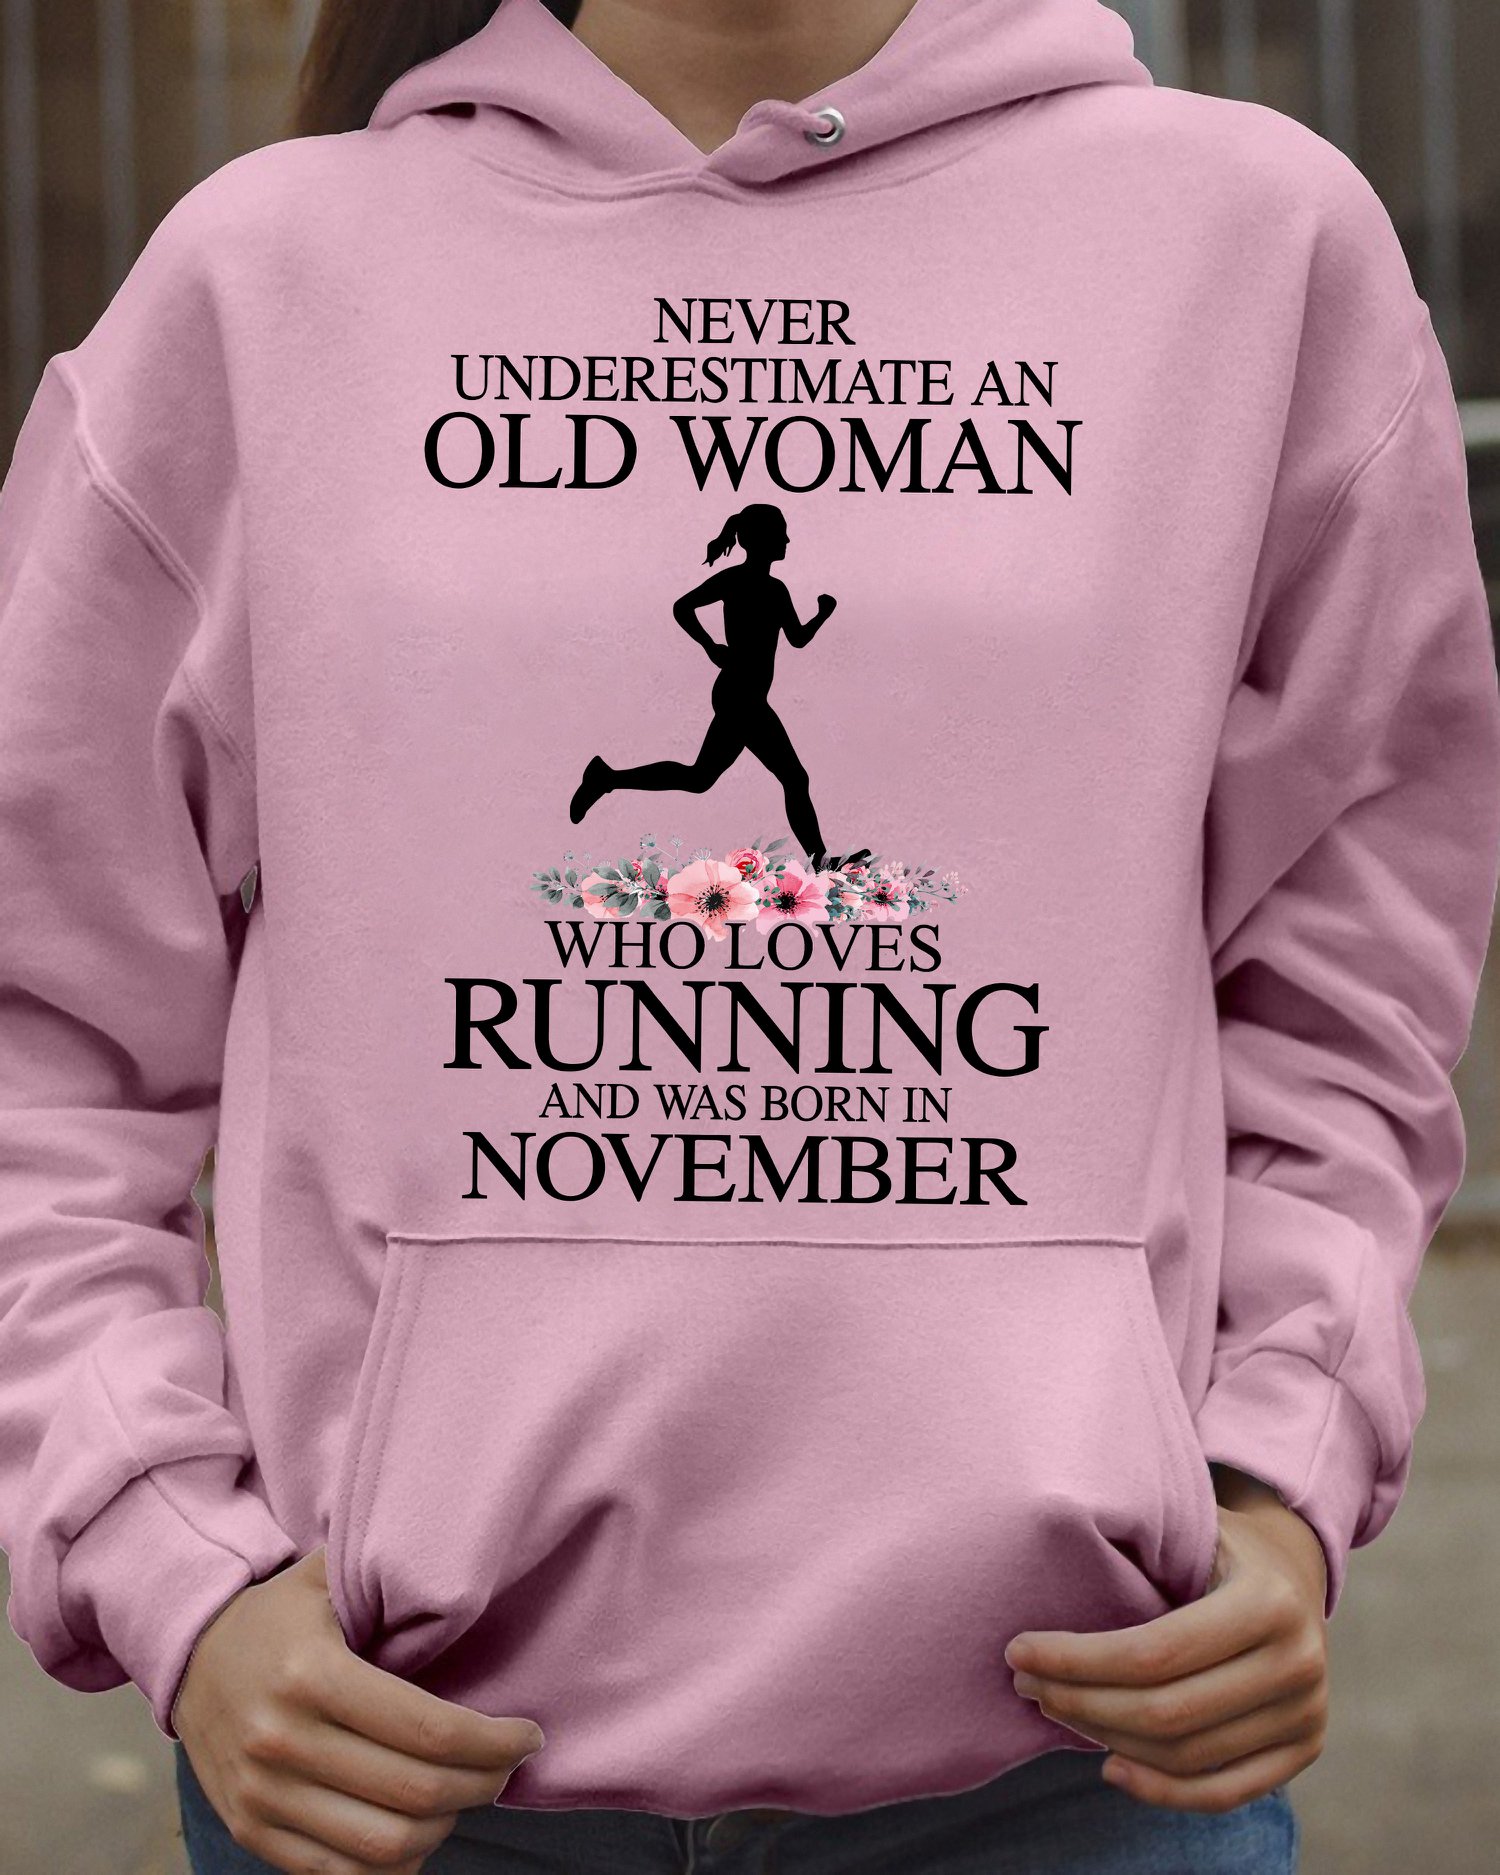 Never underestimate an old woman who loves running and was born in November